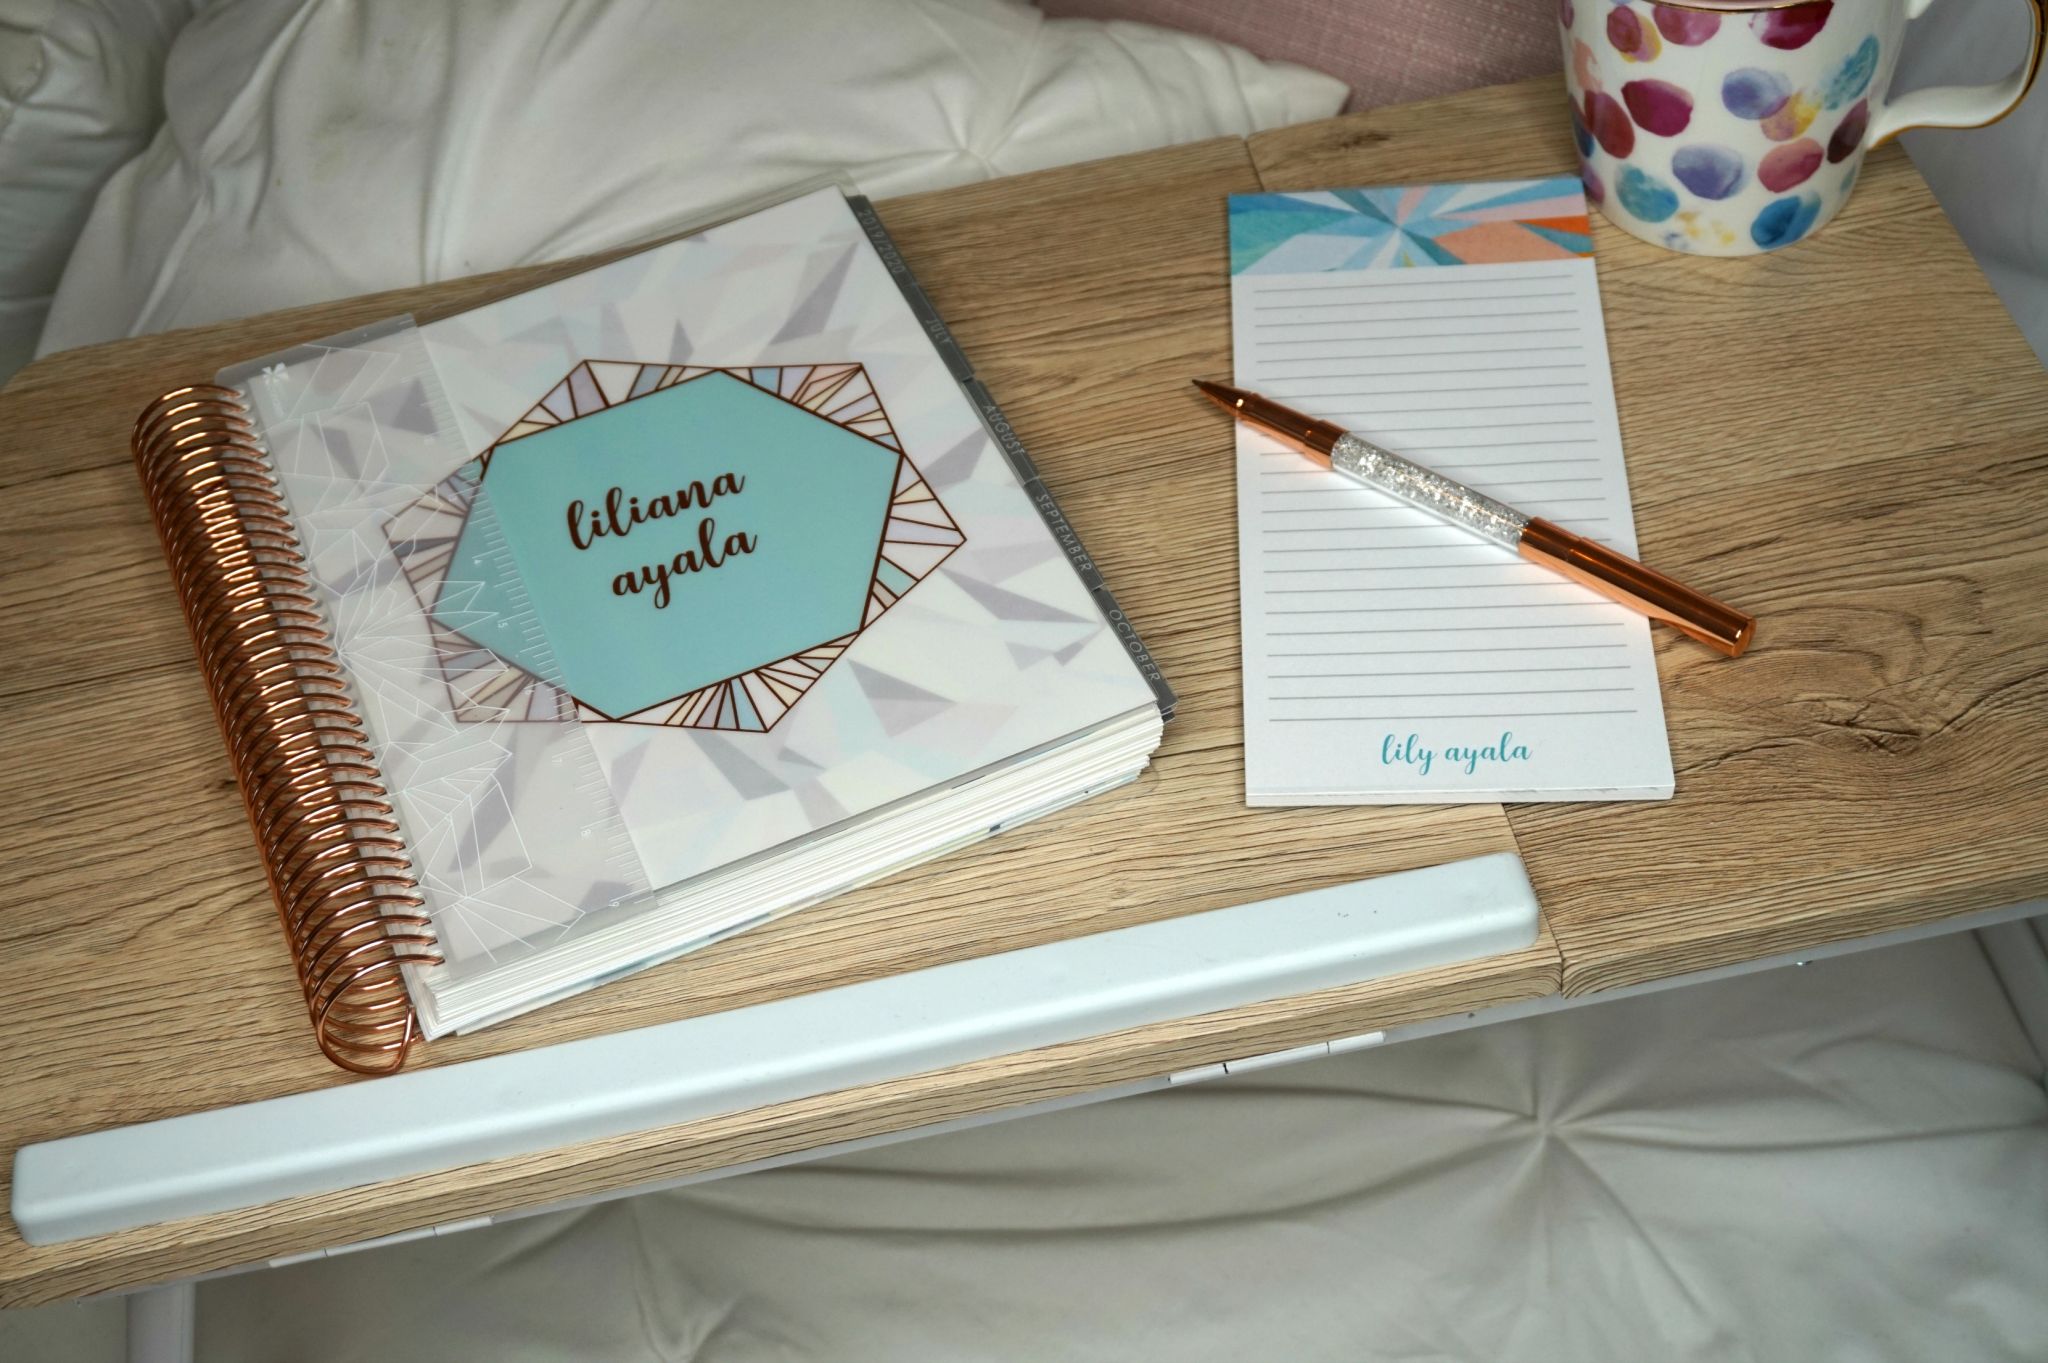 Planner Organization Hacks // How To Stay Organized // How To Use a Planner // Planner Hacks // Organization Hacks // Erin Condren LifePlanner | Beauty With Lily 